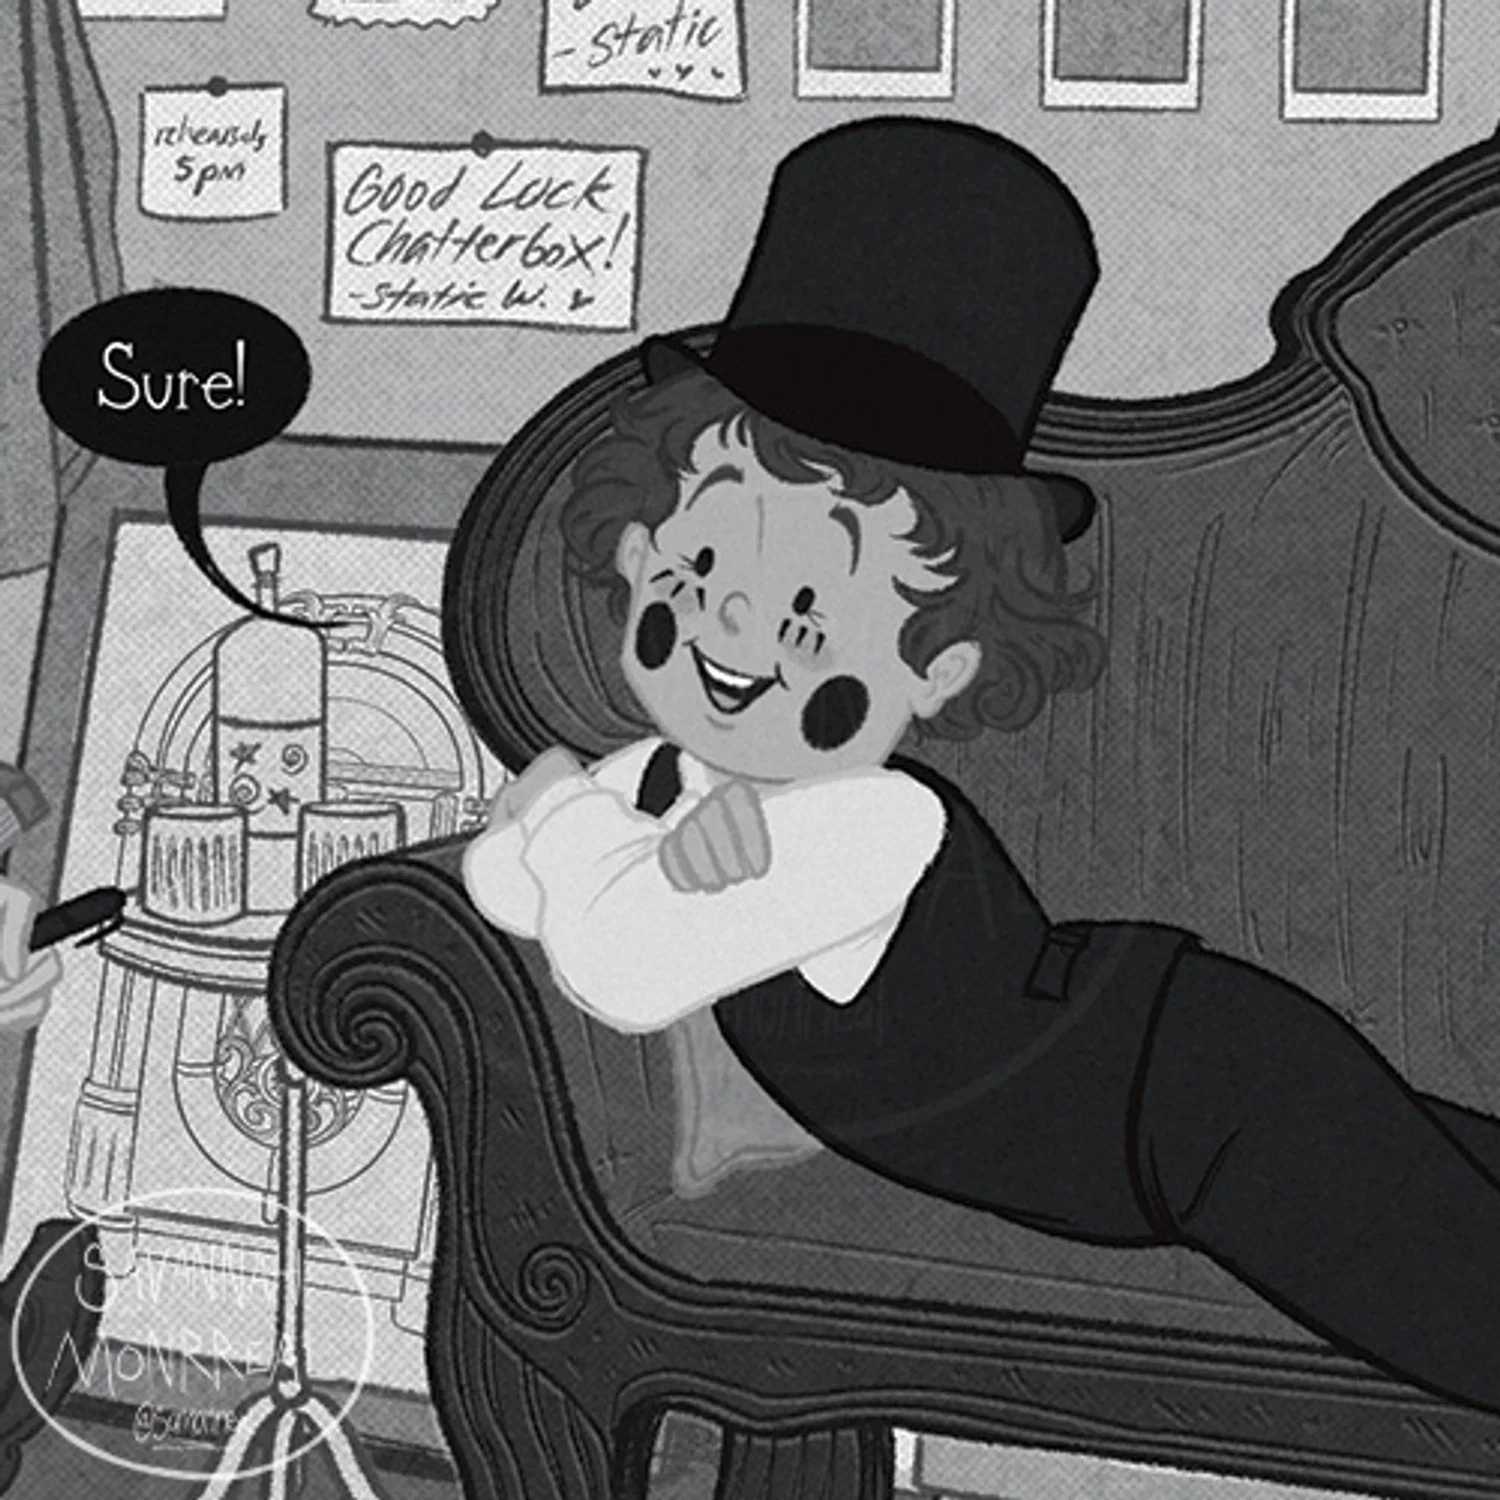 The main character is lounging on a victorian couch. He is wearing a black tuxedo and top hat. His face is drawn more simplistically, in which his eyes are just two dots with eyelashes protruding from the sides. He is smiling and conversing. A black speech bubble has white text that says "Sure!" The background is littered with pinned notes and photos. A round table next to the couch has a bottle of wine and two glass cups. The image is monochrome. There is a watermark in the corner that says "Savannah Monrreal @samonrreal" 